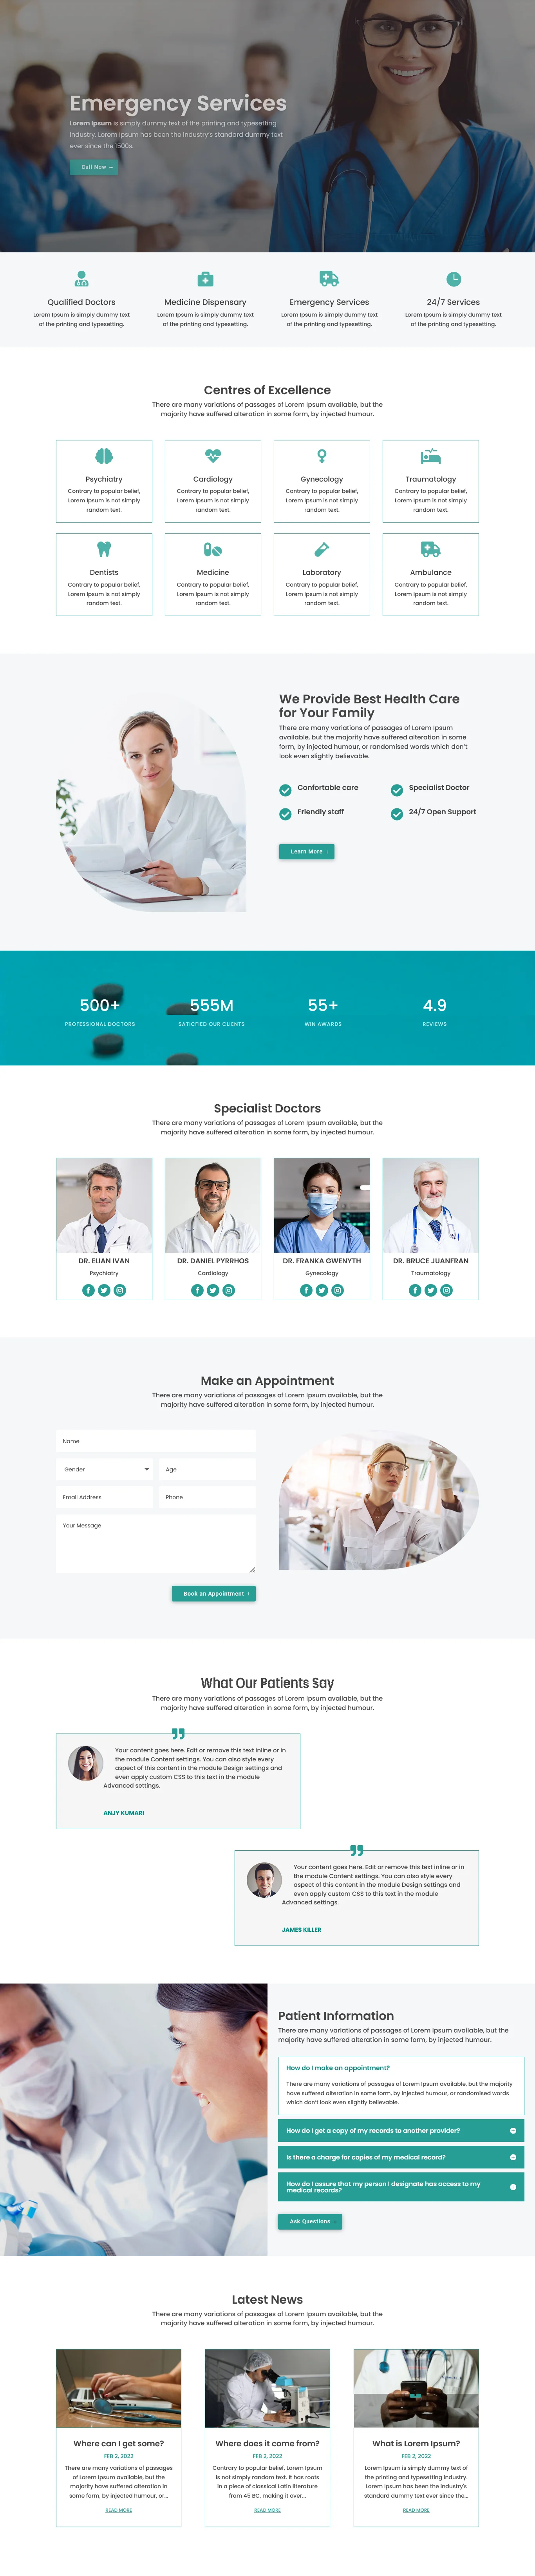 medcare-medical-healthcare-service-layout